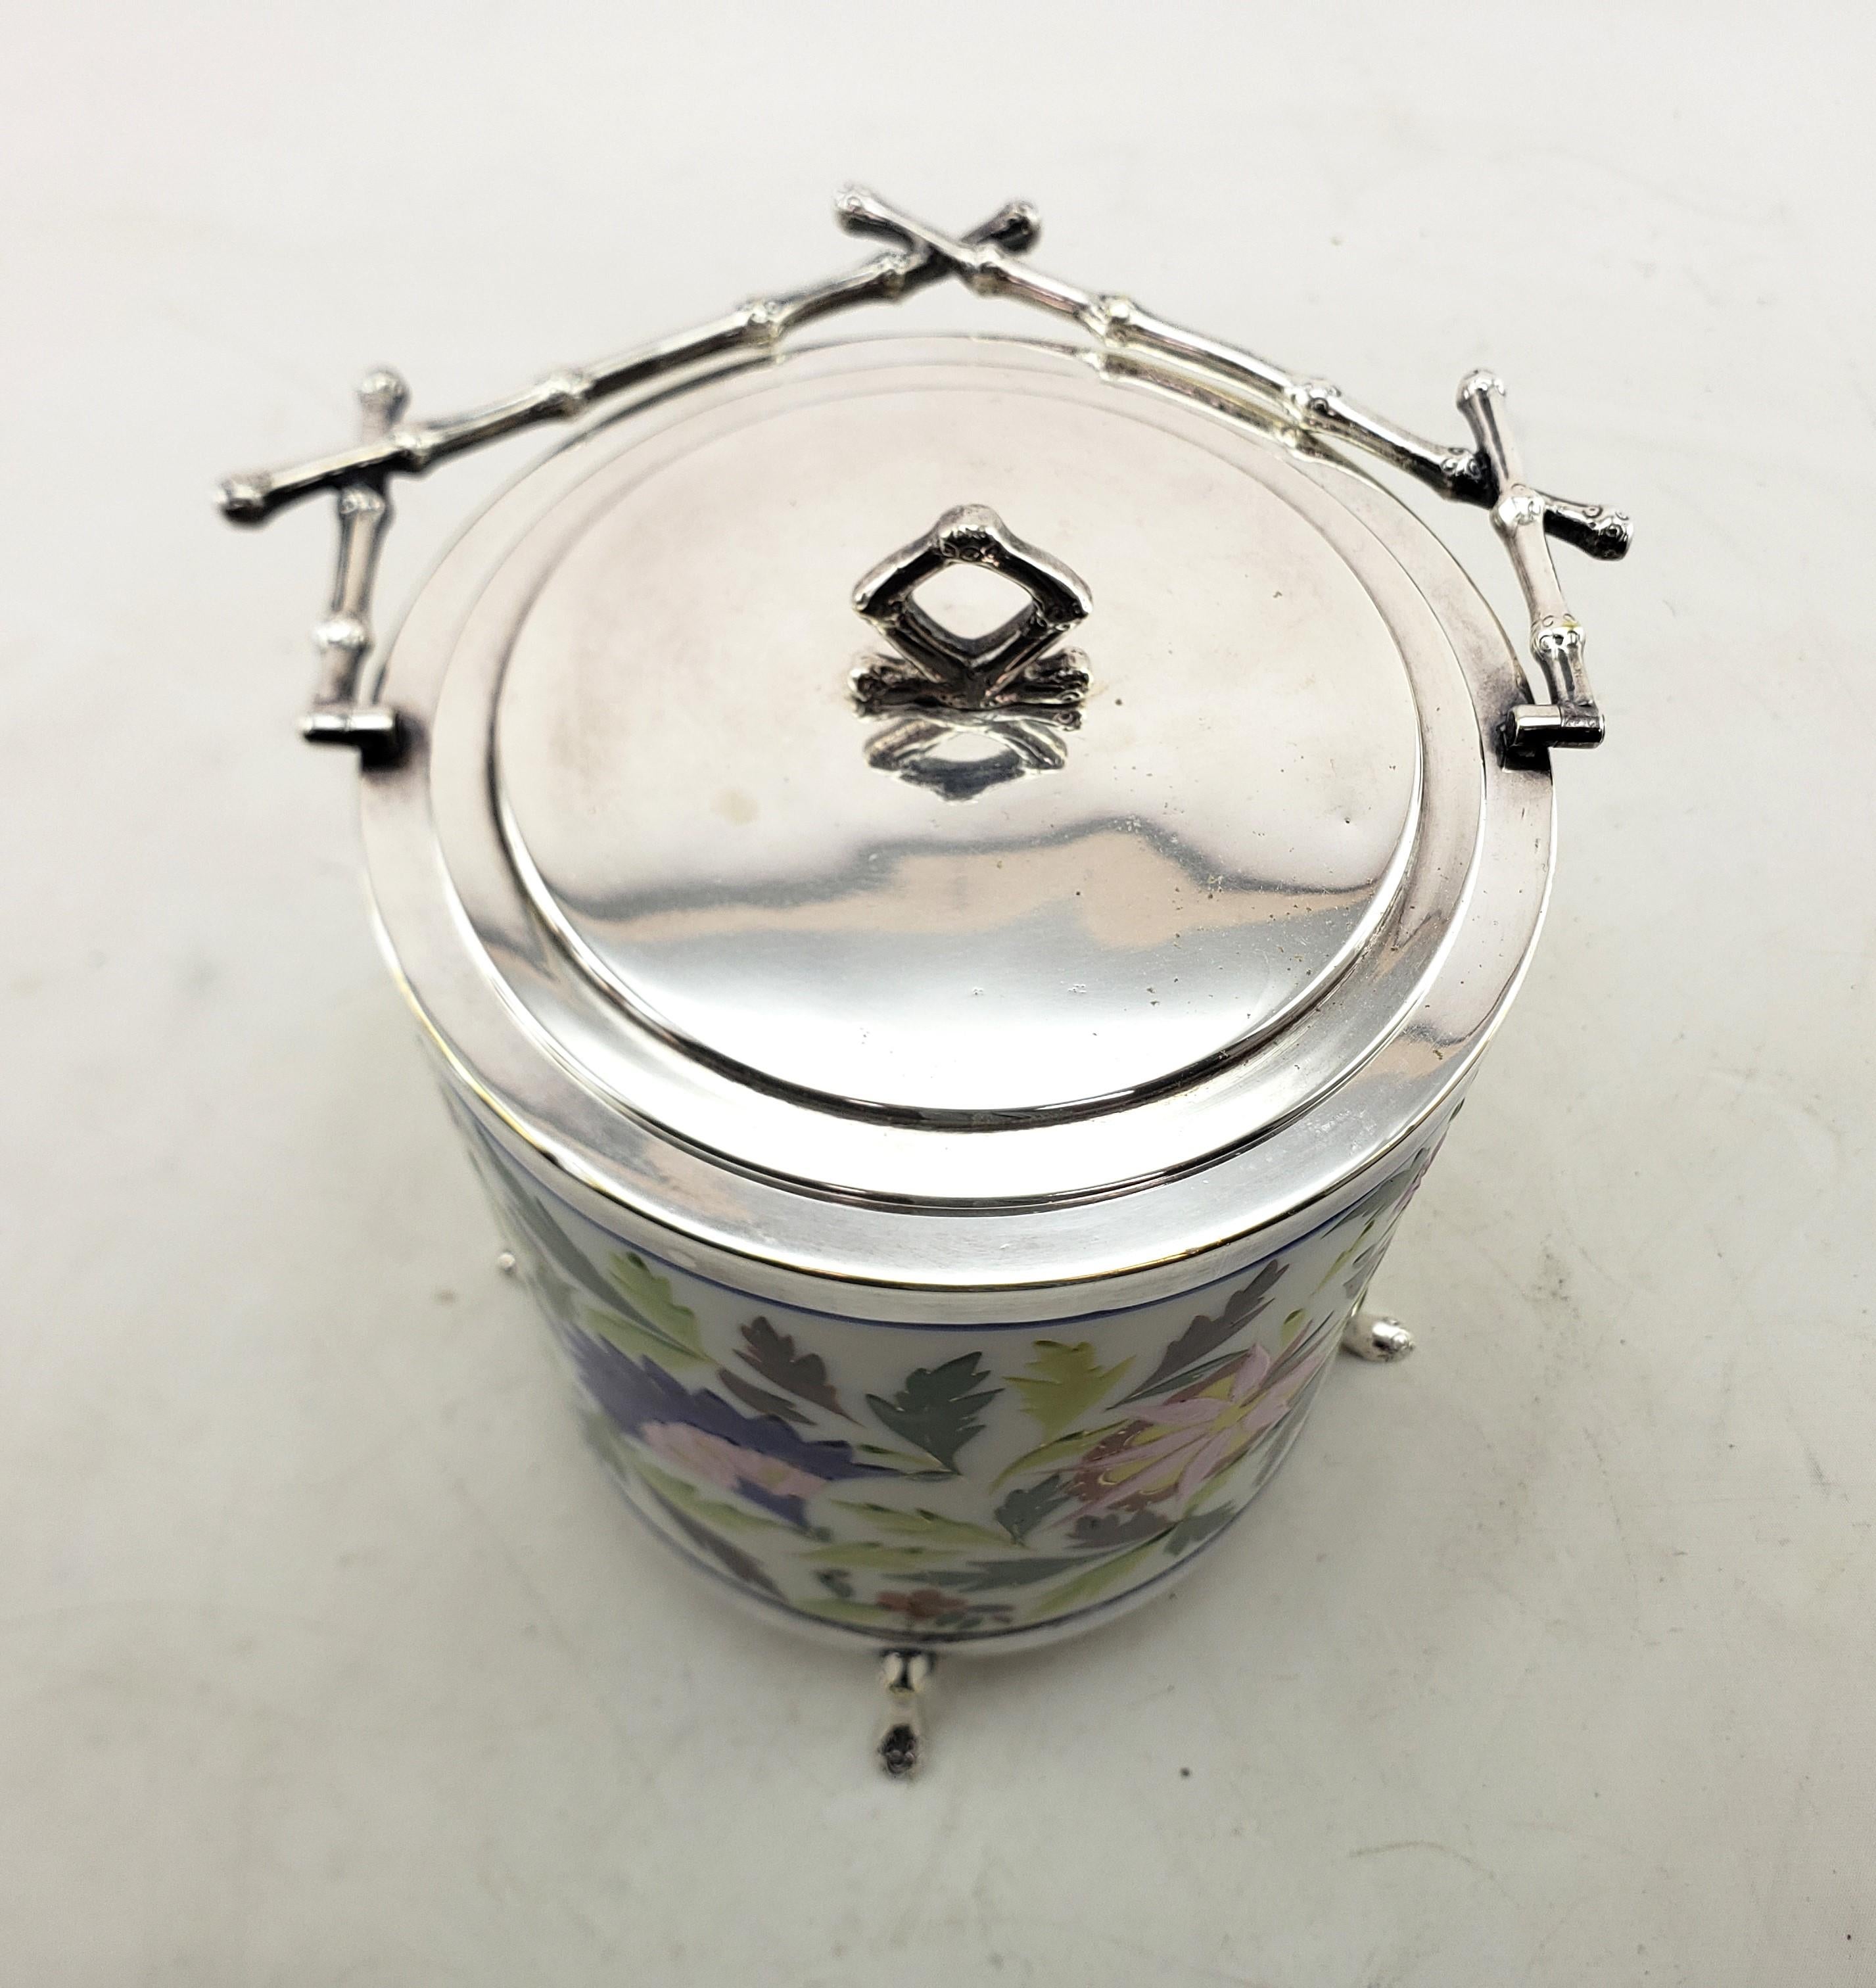  Silver Plated & Ceramic Biscuit Barrel with Floral Decoration & Twig Handle In Good Condition For Sale In Hamilton, Ontario